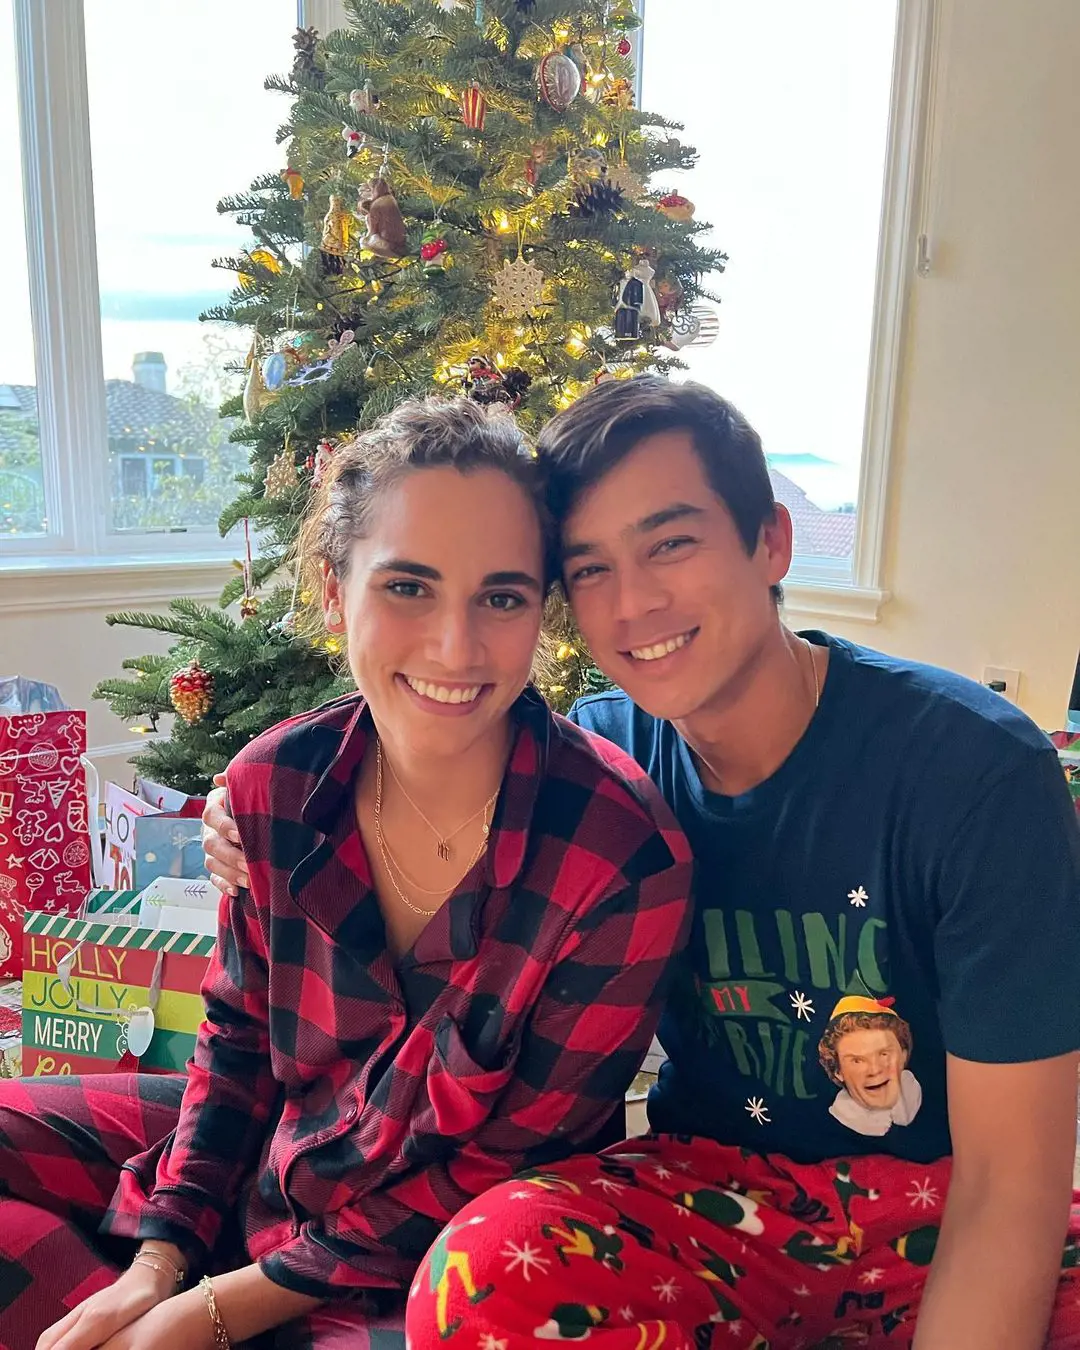 Mackenzie and Maria celebrating Christmas with their loved ones in December 2022 in North Carolina